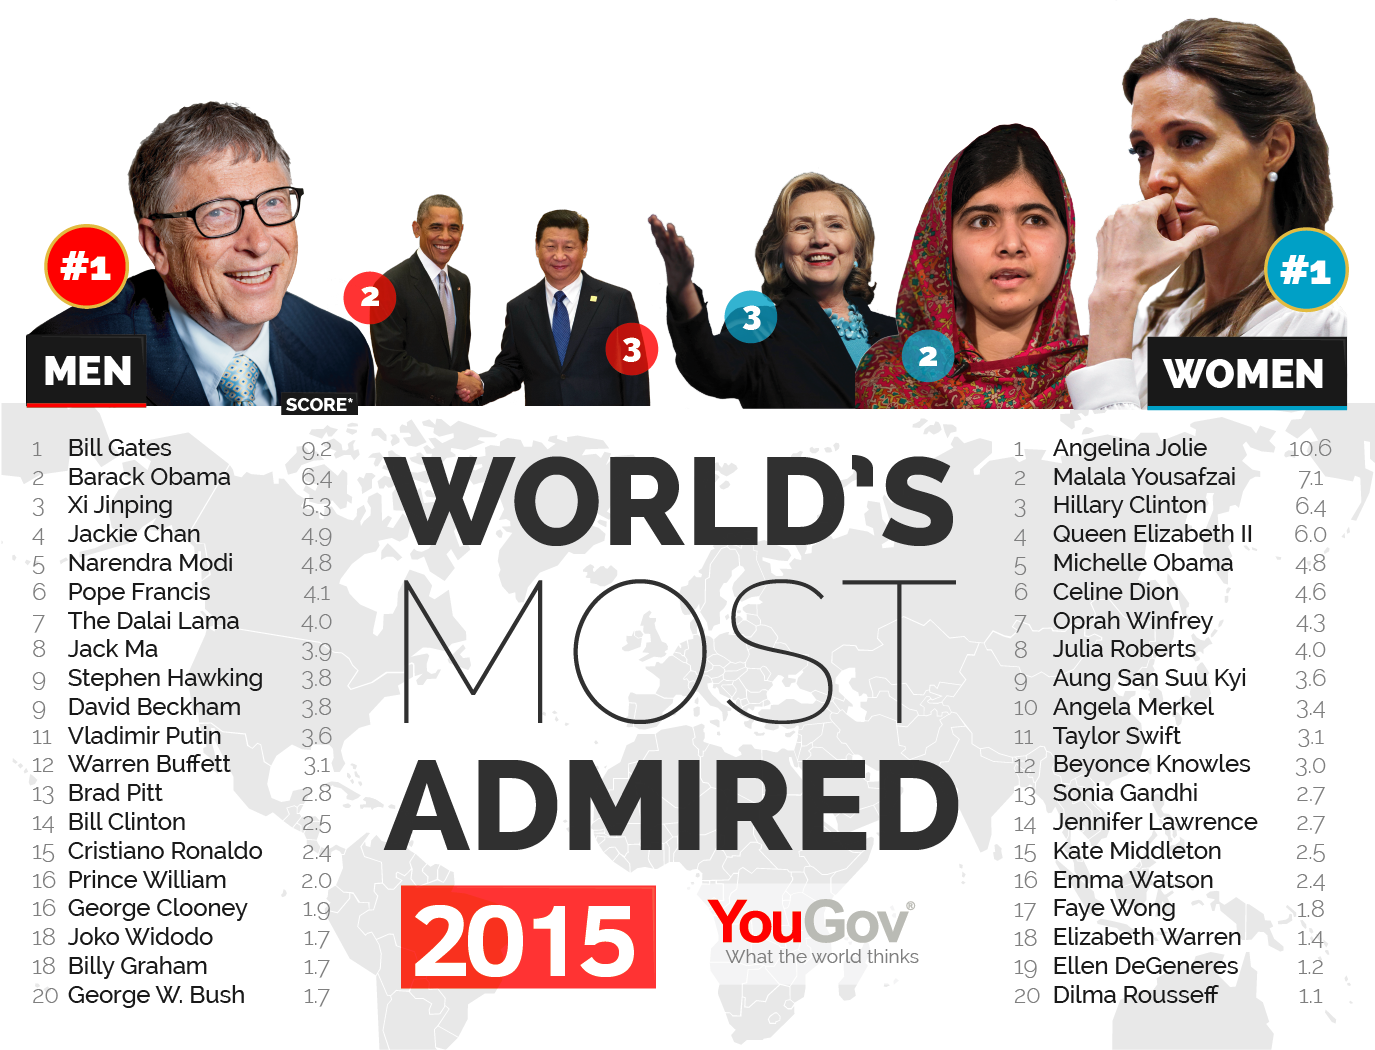 World's most admired 2015